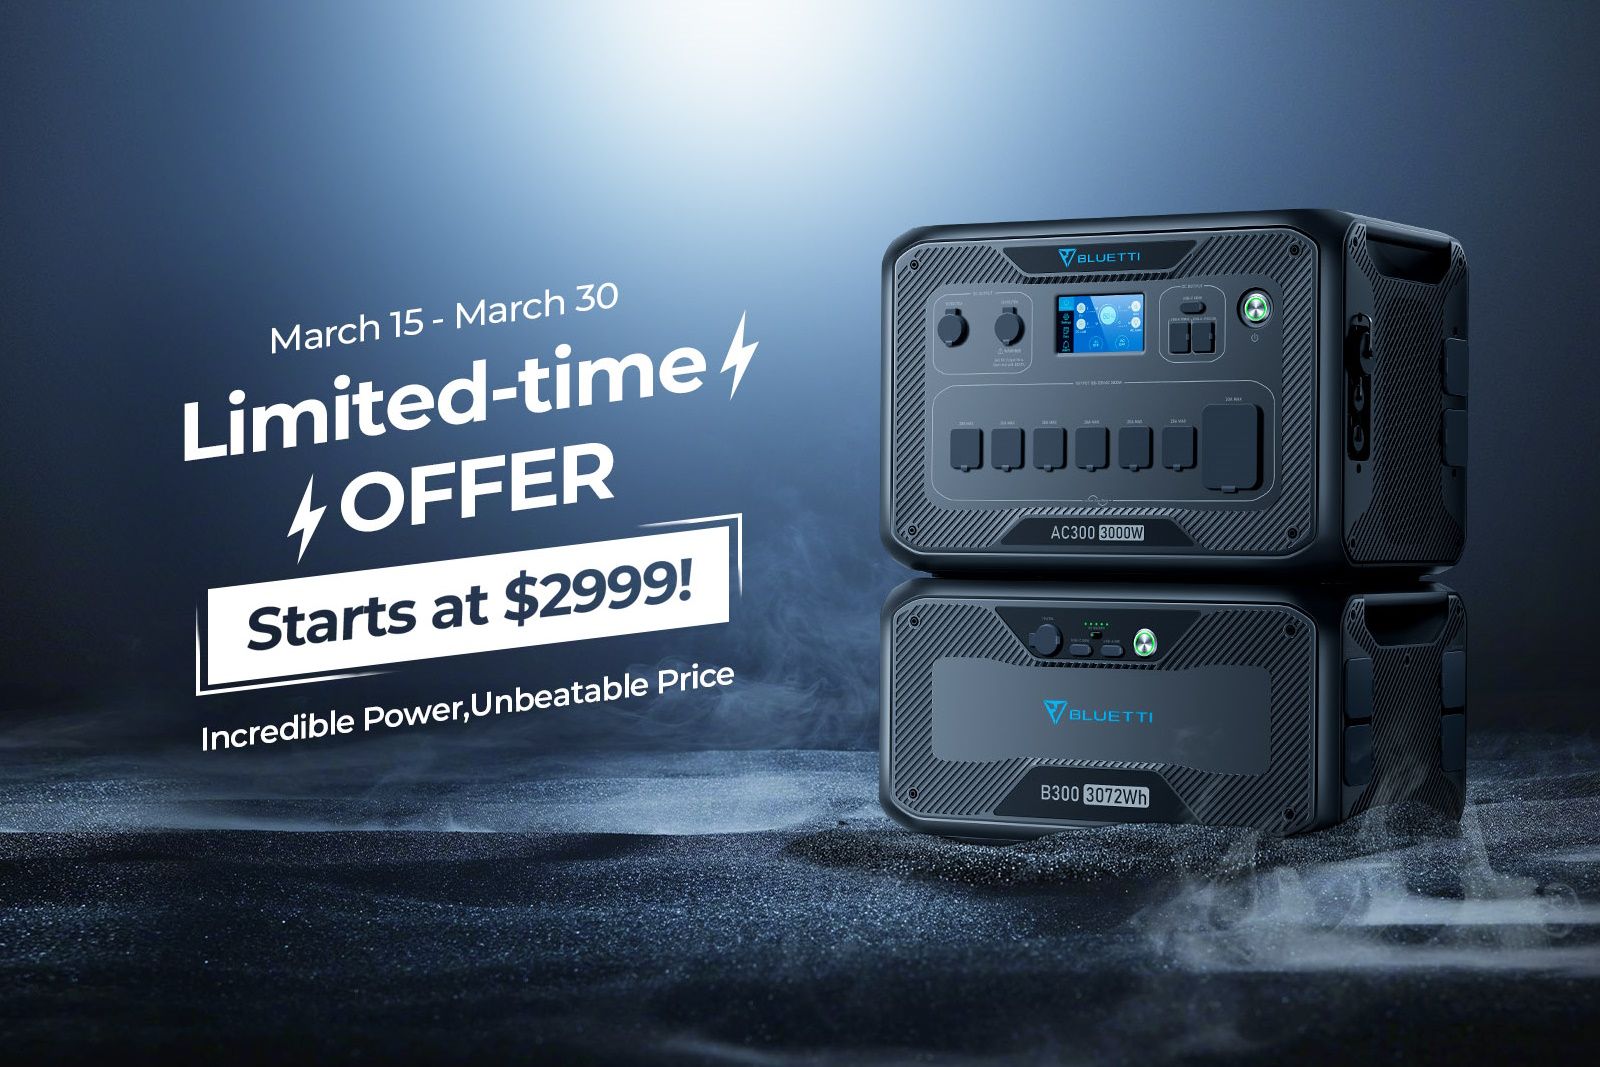 Get on the grid with this limited-time offer on Bluetti's AC300 and B300 bundle